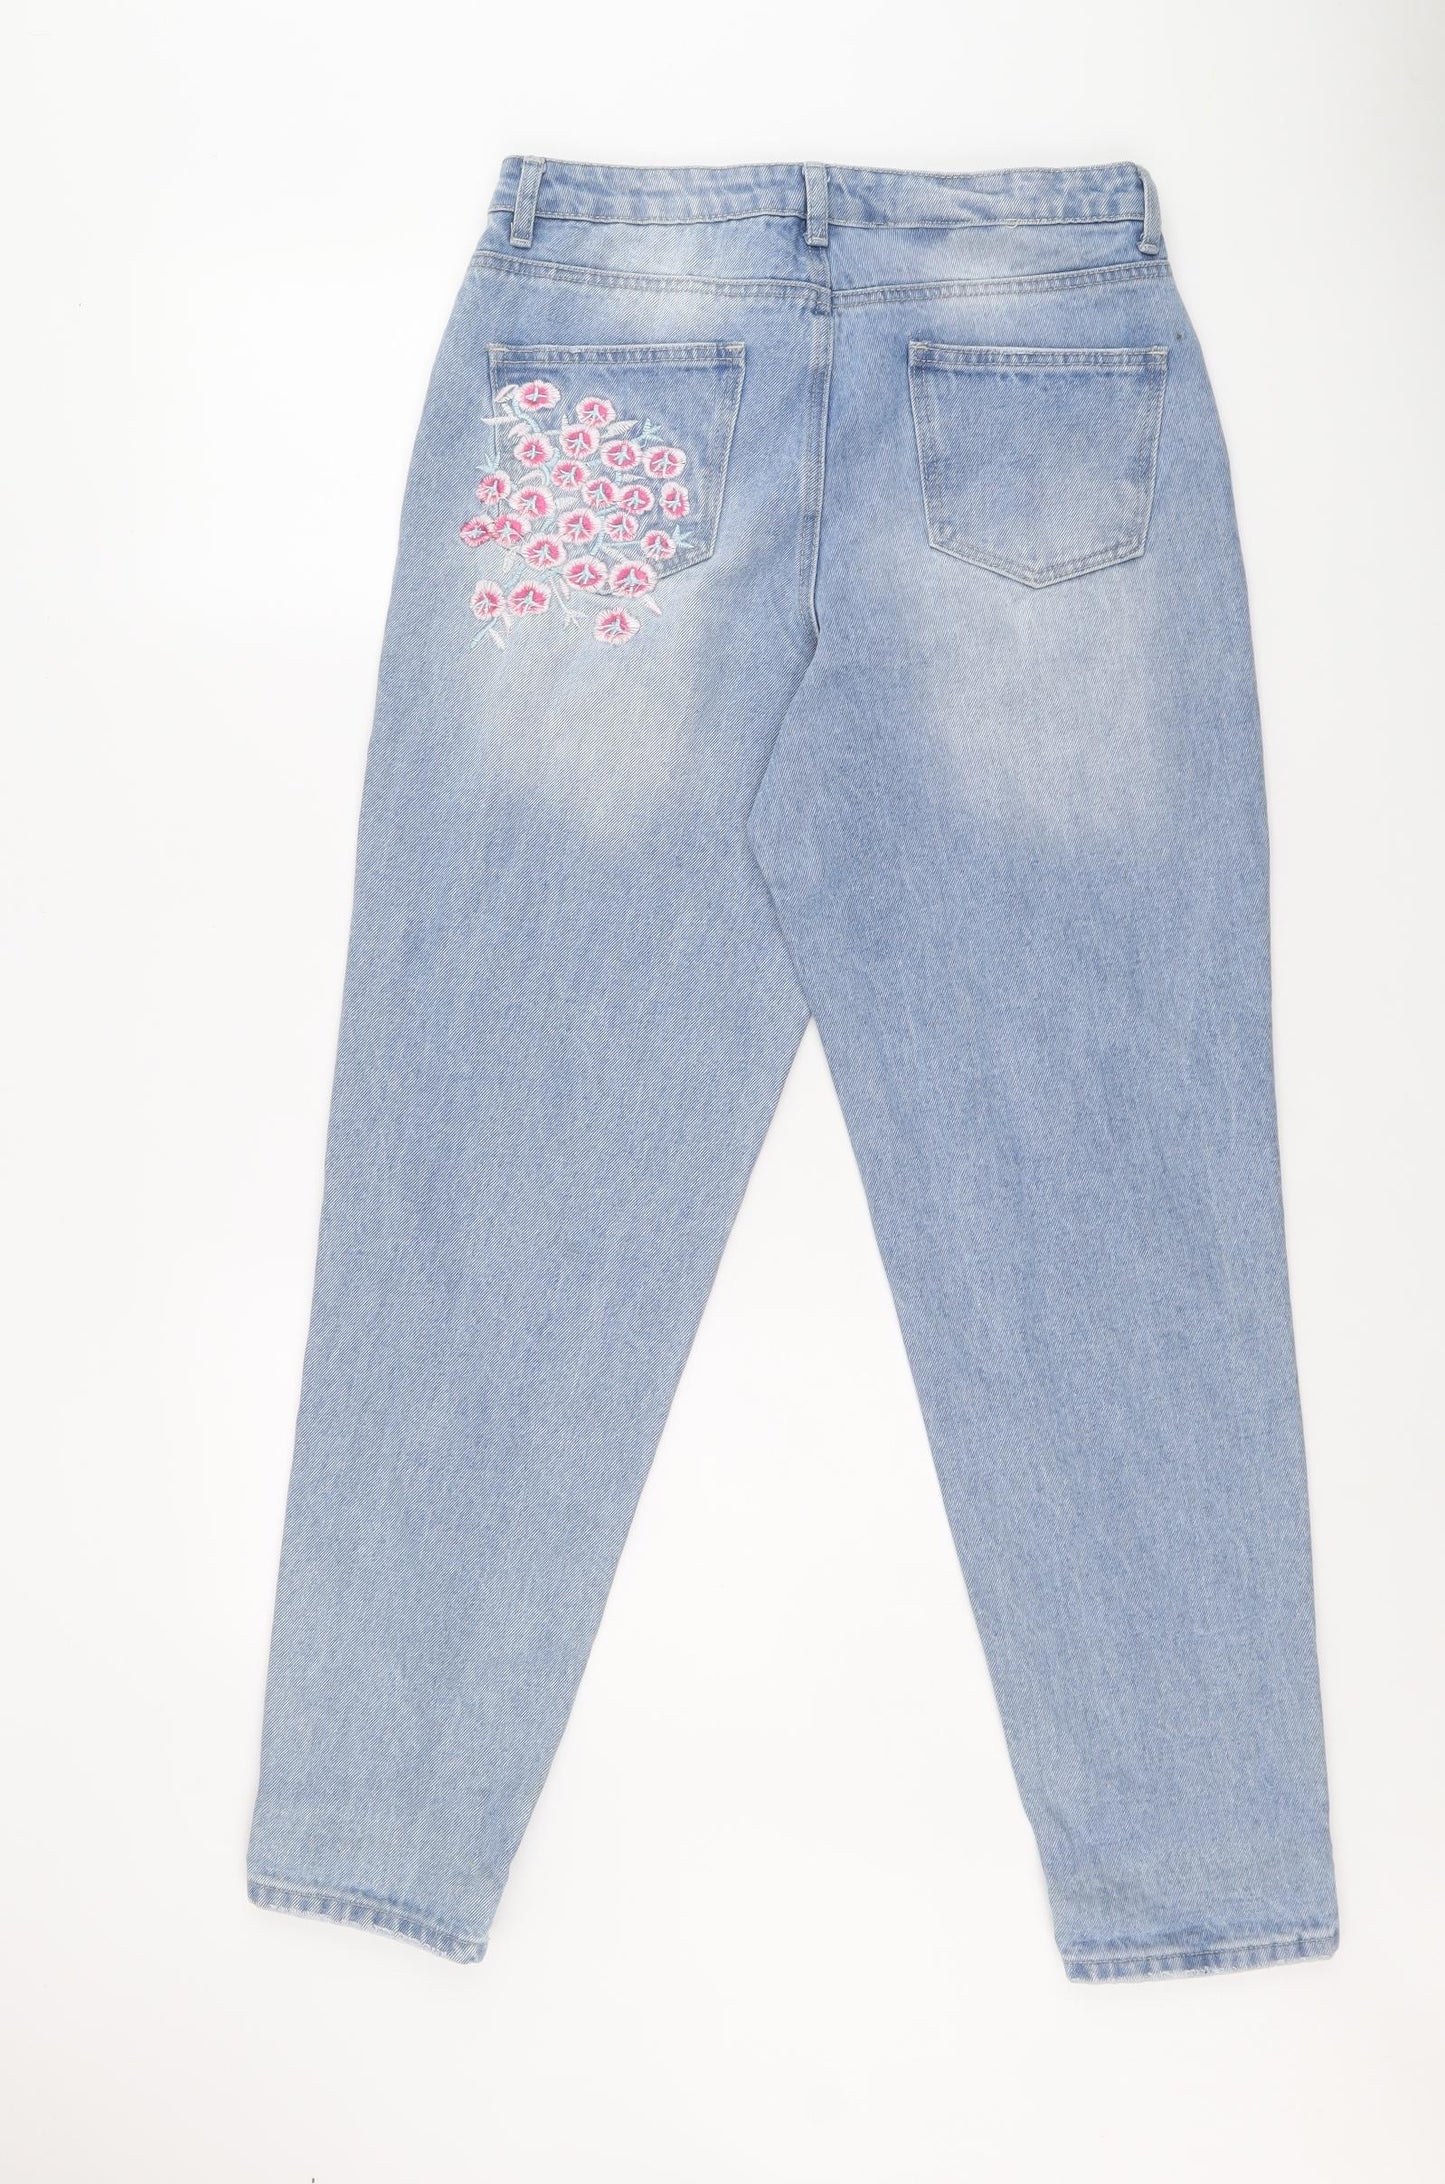 Denim & Co. Womens Blue Cotton Tapered Jeans Size 12 L29 in Regular Zip